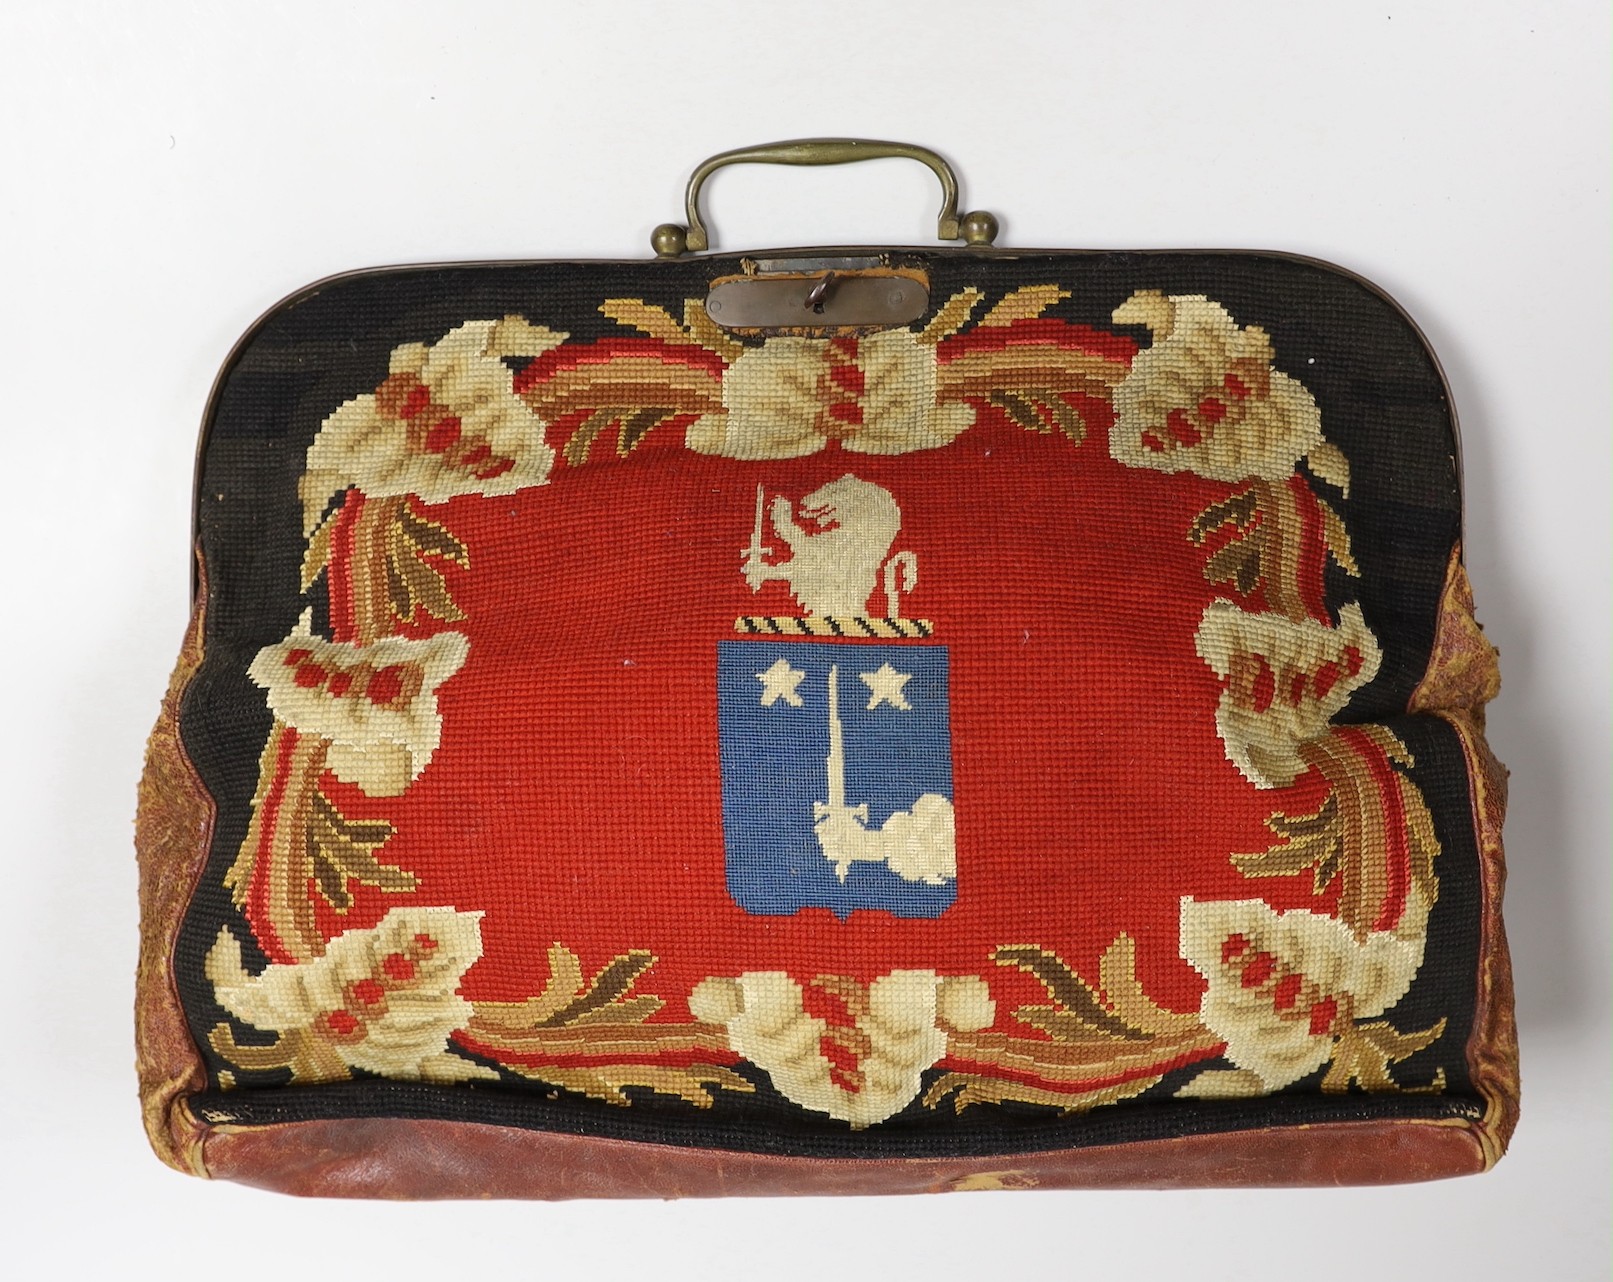 A 19th century needlework and leather bag and a leather Gladstone bag, needlework bag frame 40cms wide